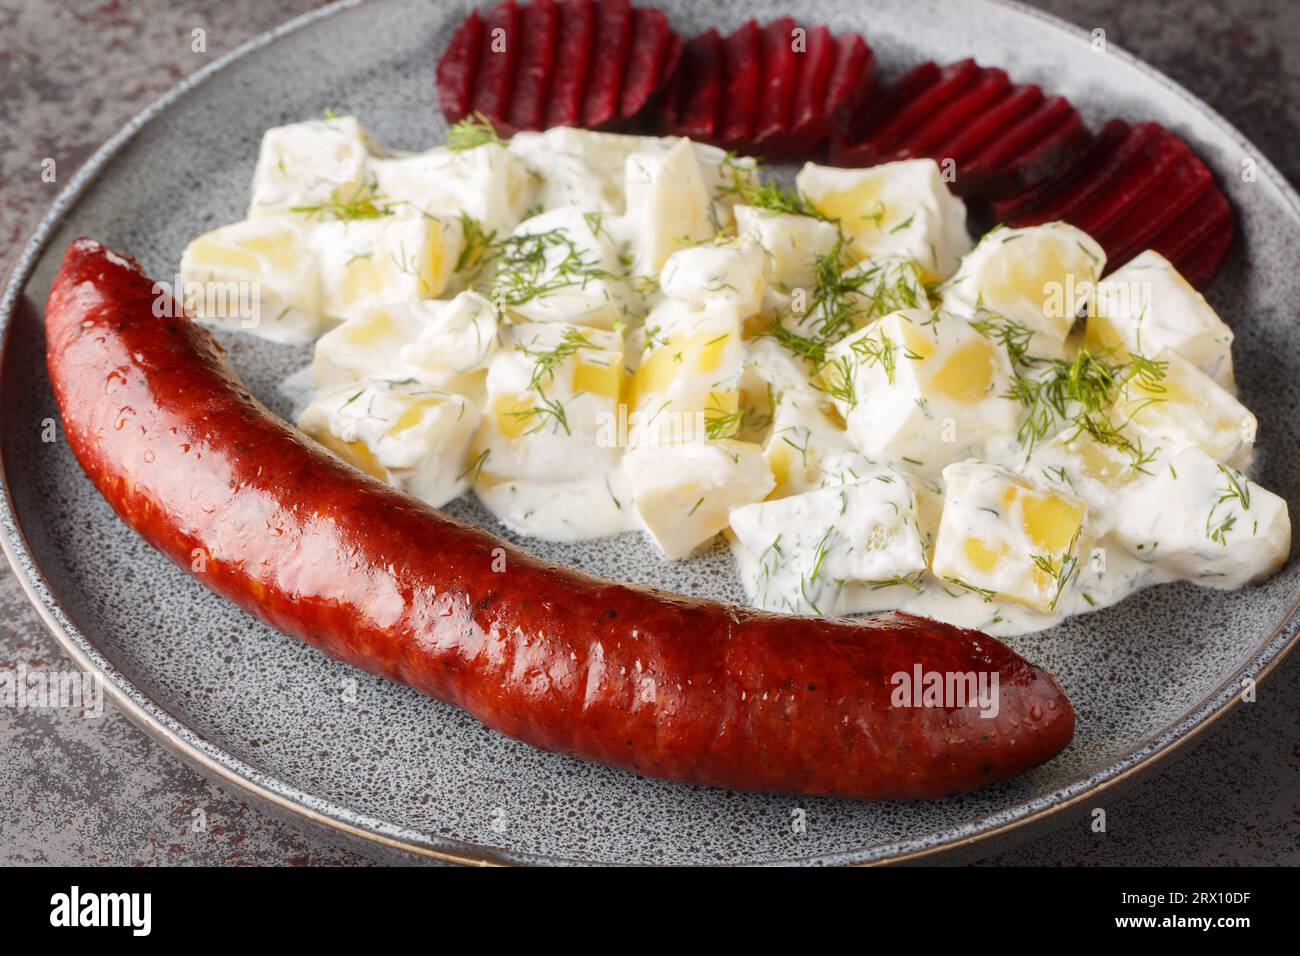 https://c8.alamy.com/comp/2RX10DF/swedish-lard-sausage-isterband-with-potatoes-in-cream-sauce-with-dill-and-boiled-beets-close-up-on-a-plate-on-the-table-horizontal-2RX10DF.jpg